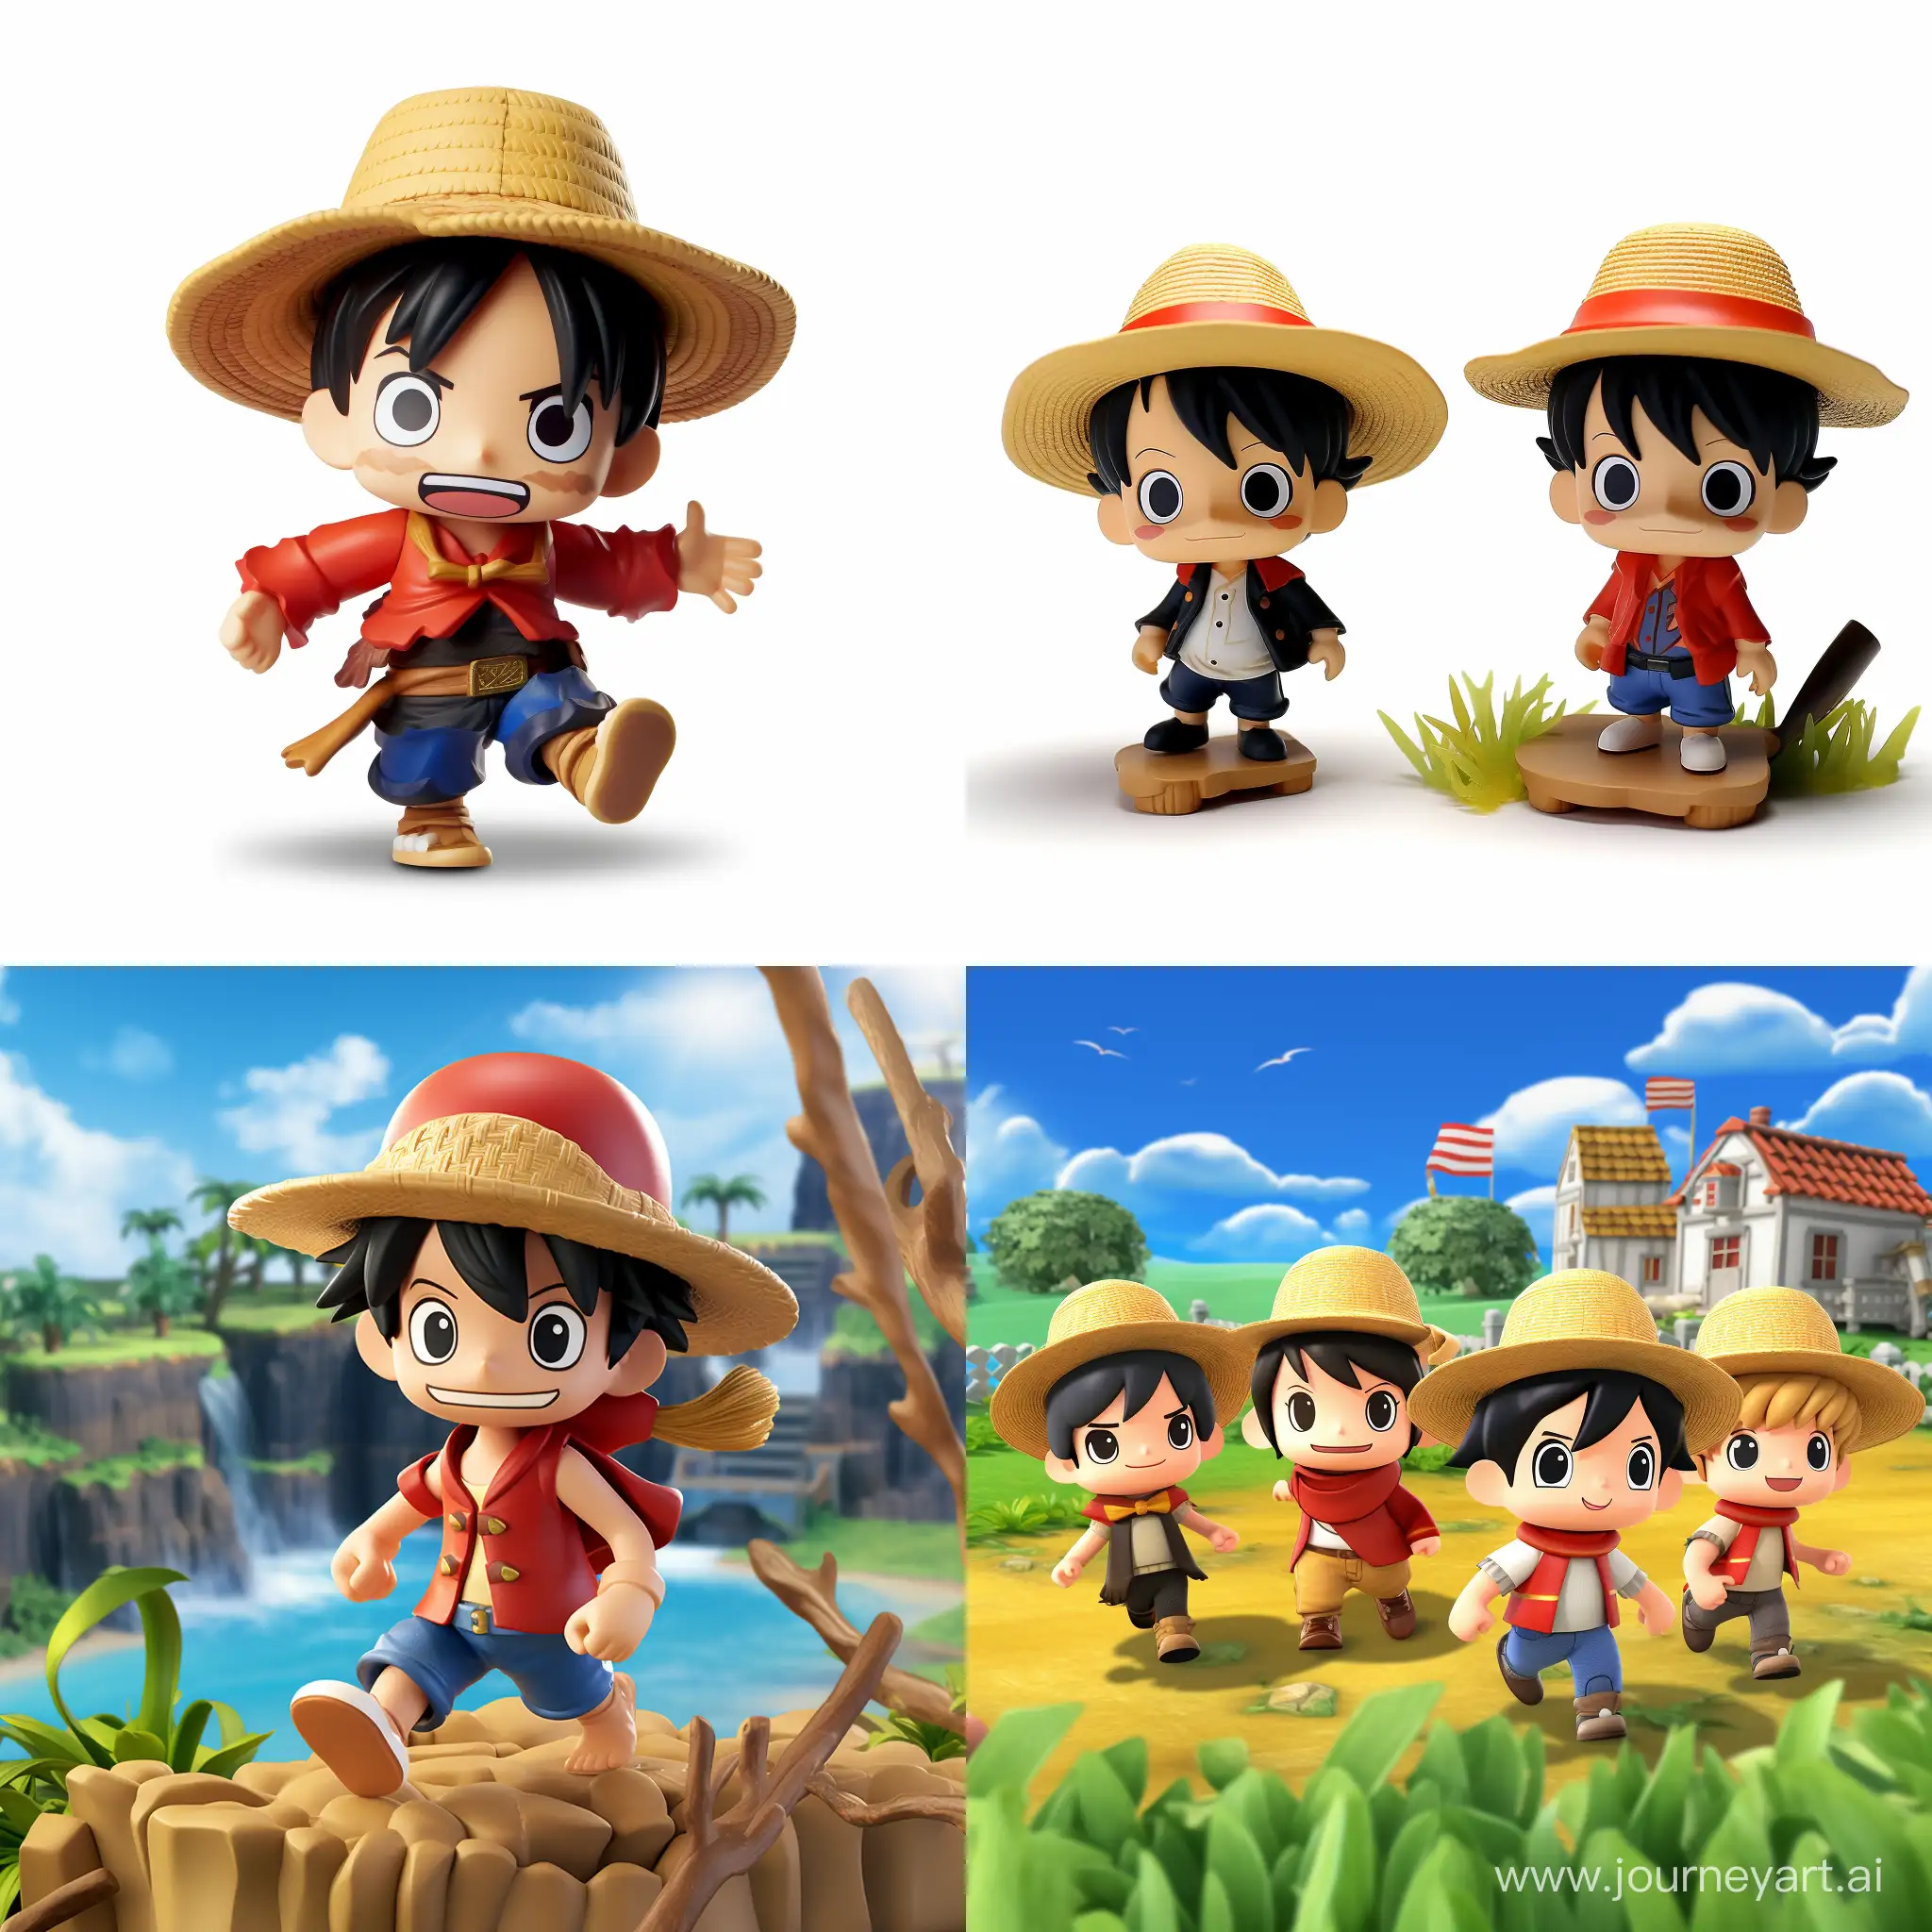 Develop a playful and endearing playground that generates adorable Luffy action figures set against stunning backgrounds. Ensure meticulous attention to detail in the design of the figures, capturing Luffy's iconic features, such as his straw hat, stretching abilities, and signature grin. Allow users to customize expressions and poses for added personalization. Implement high-quality rendering techniques to ensure crisp and vibrant visuals. Surround the action figures with dynamic backgrounds, ranging from sunny seascapes to vibrant islands, enhancing the overall charm. Offer options for various accessories and playful interactions, creating a series of irresistibly cute Luffy action figures in diverse and delightful settings."